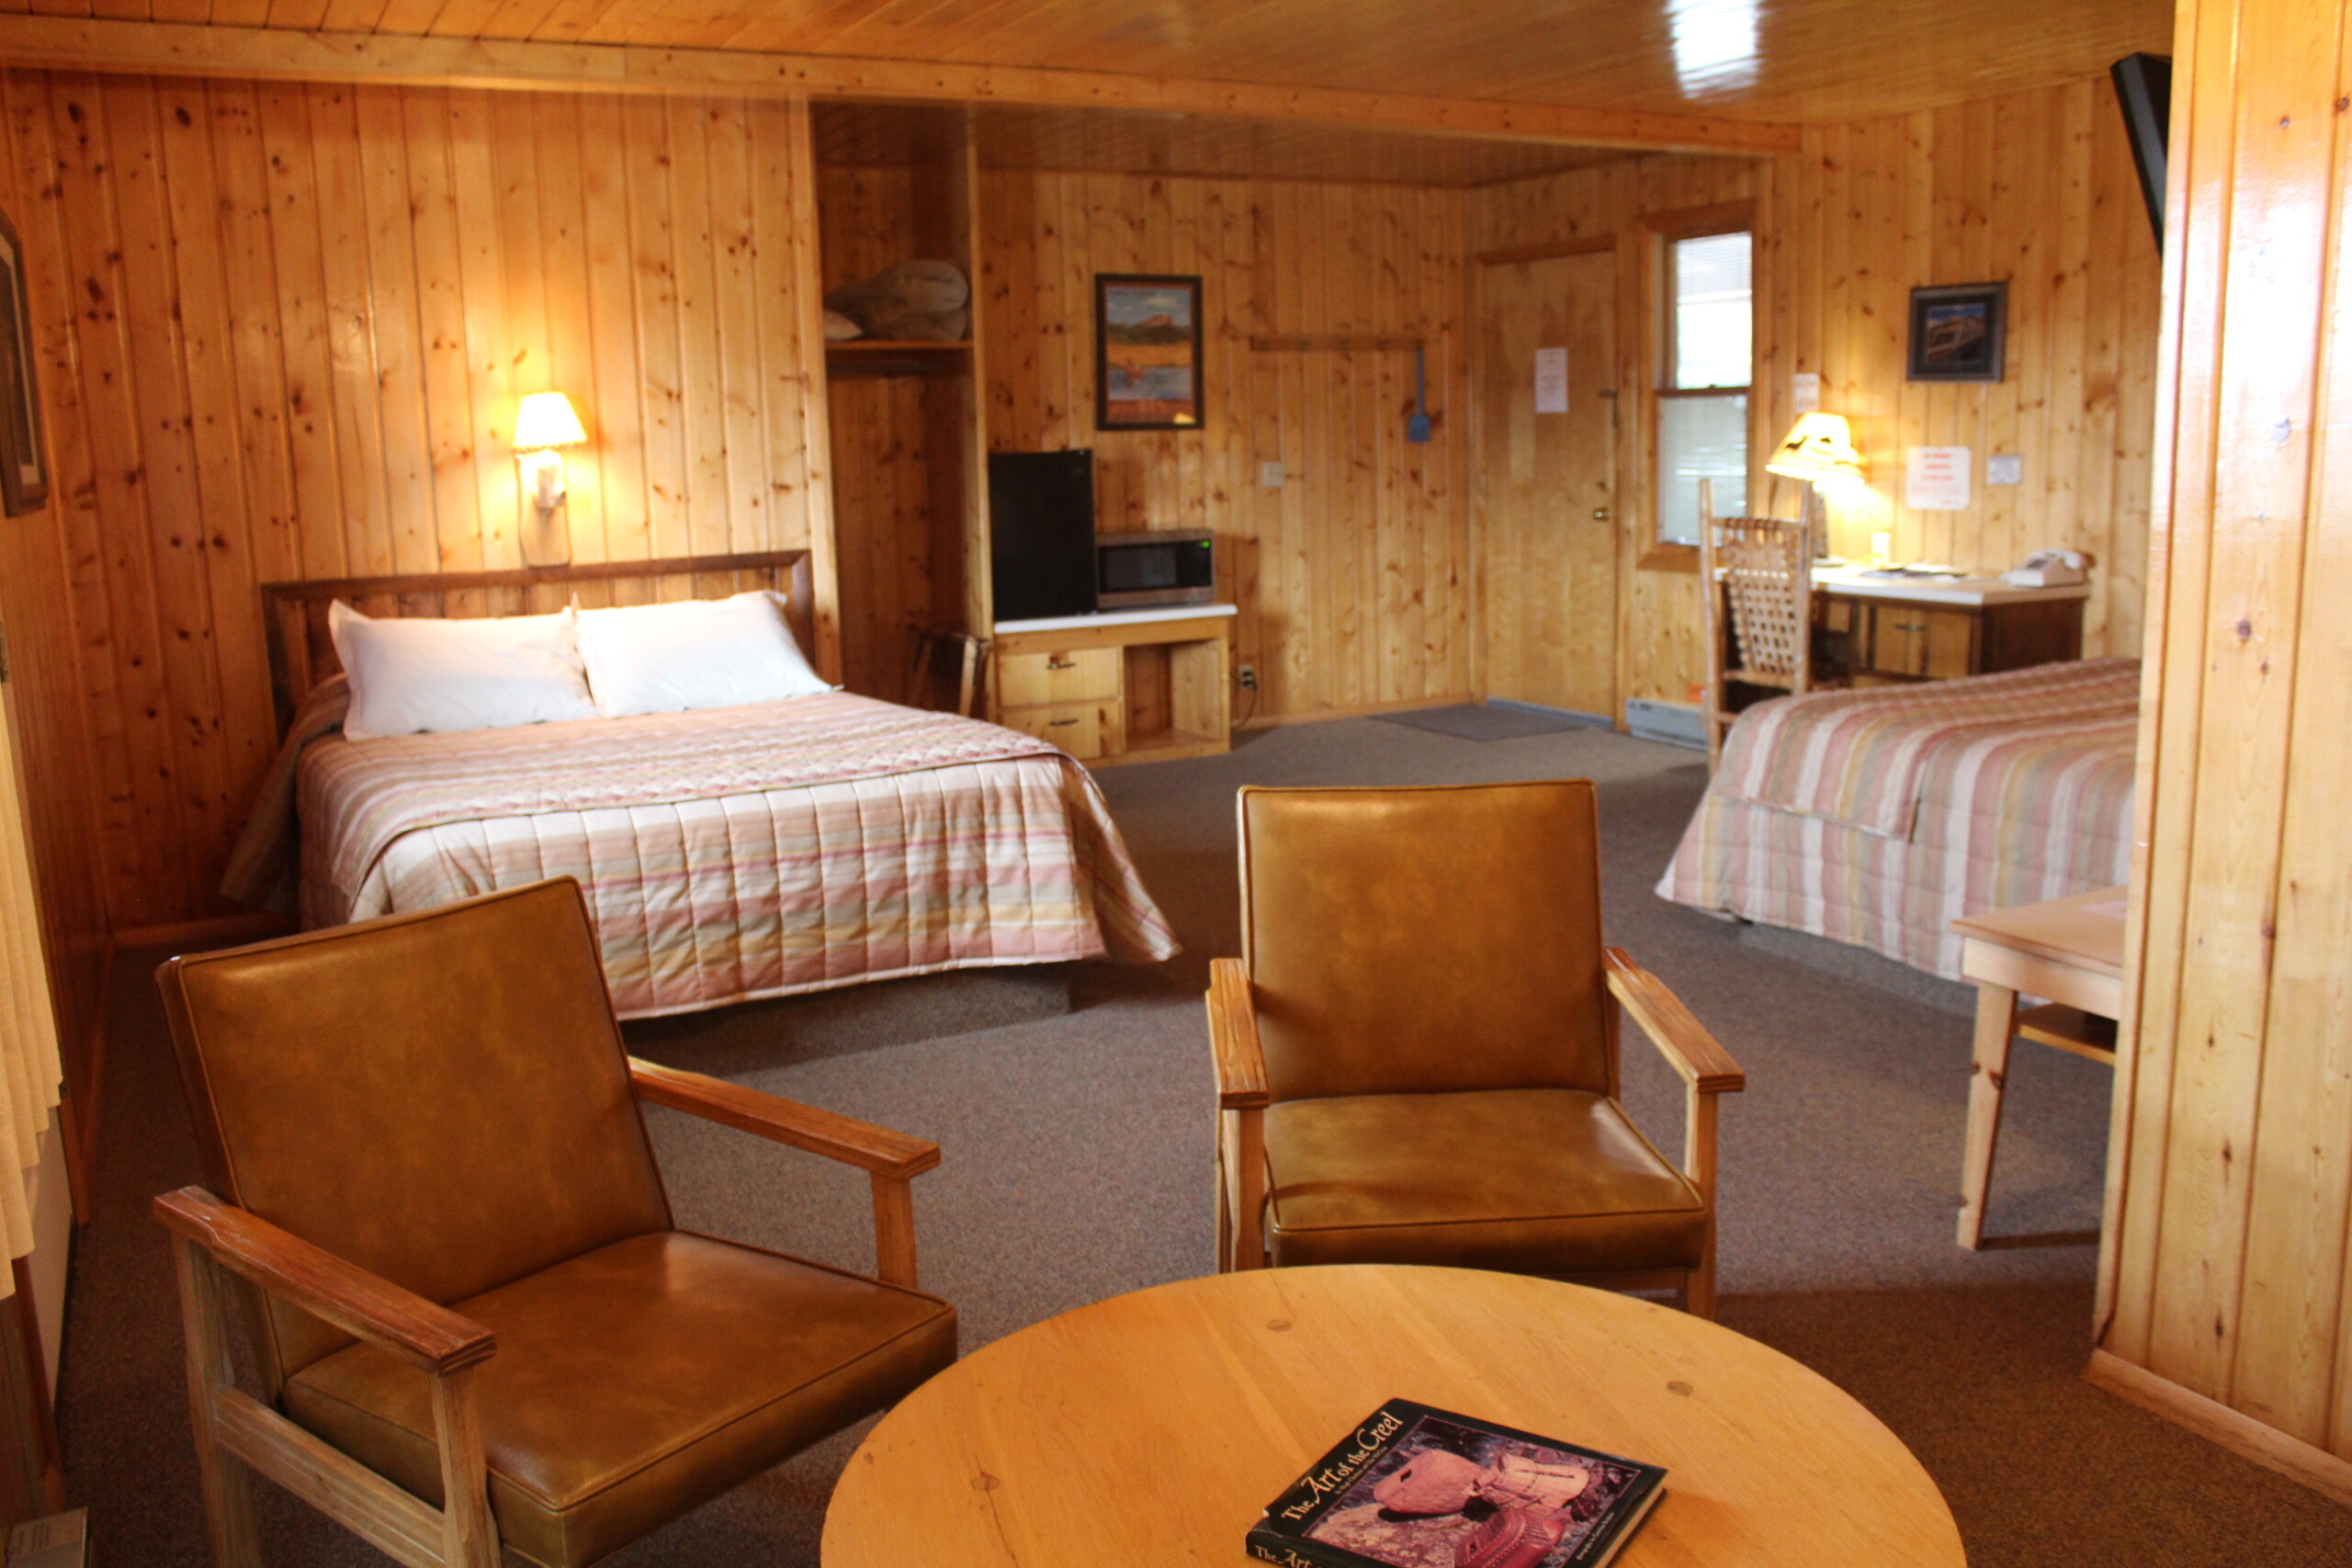 Mini Suite 24 at the Rainbow Valley Lodge in Ennis Montana